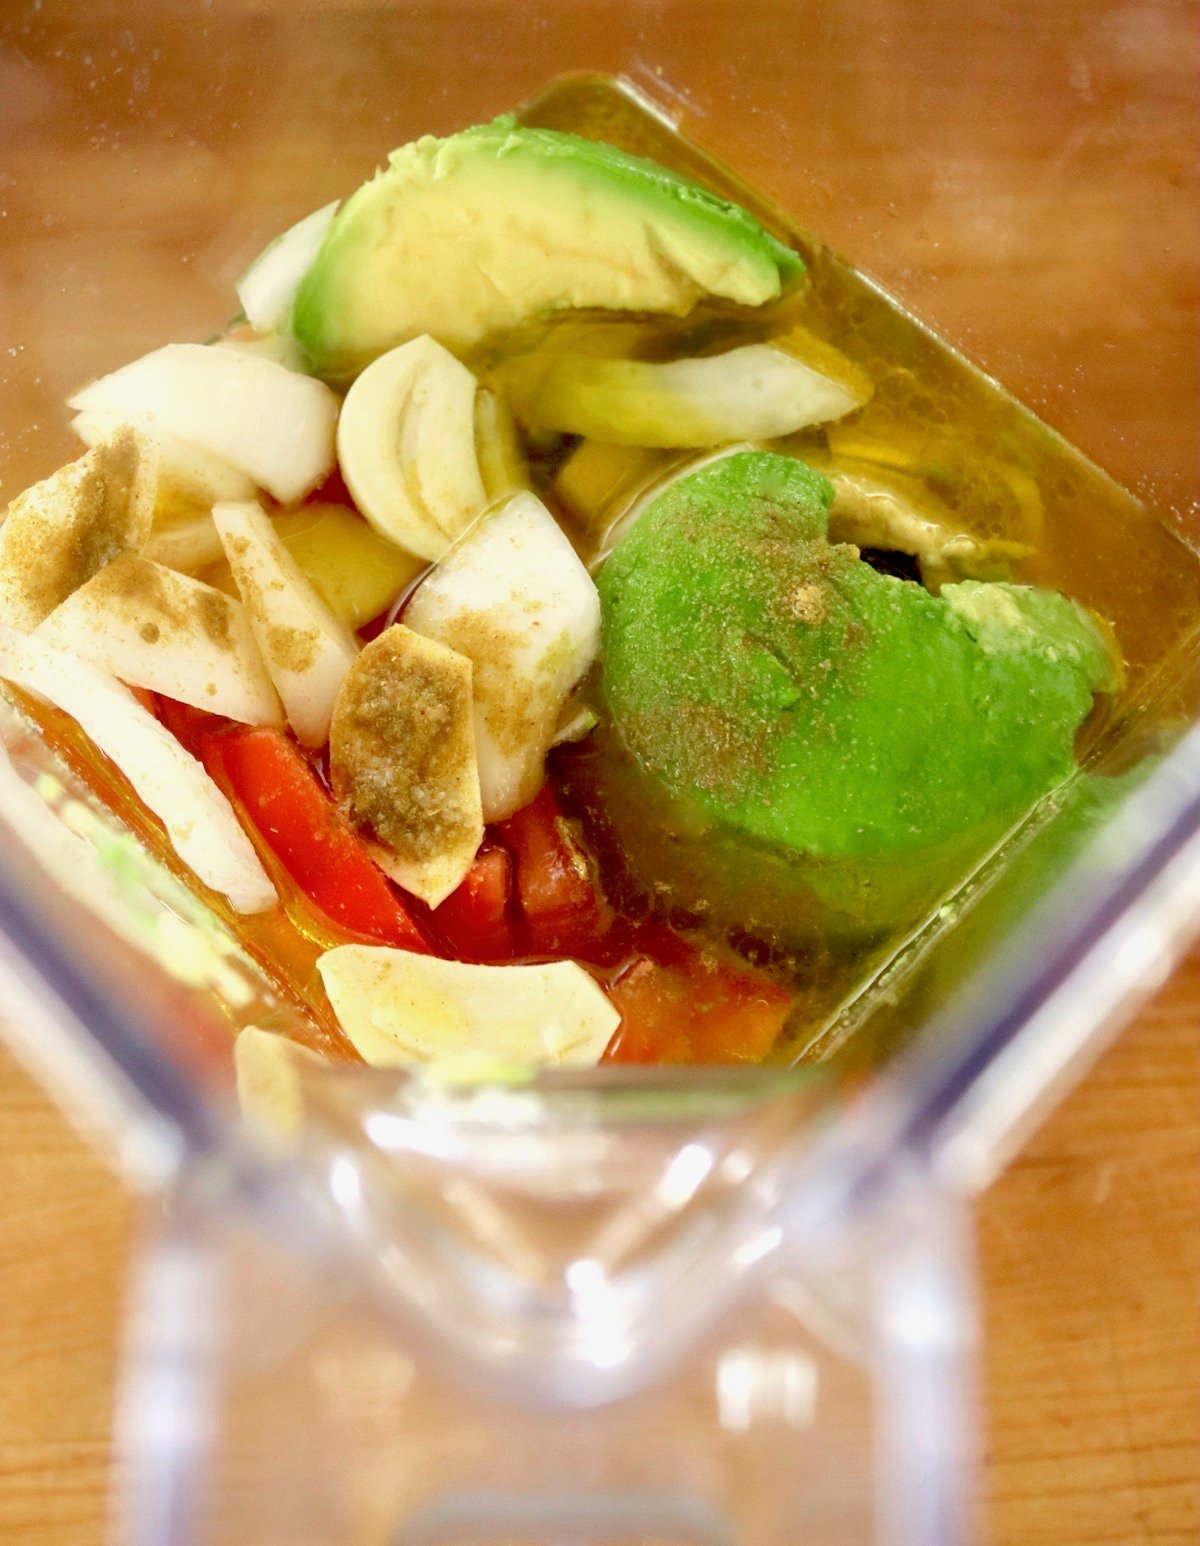 Blender filled with pieces of onion, avocado, spices, garlic and tomato.